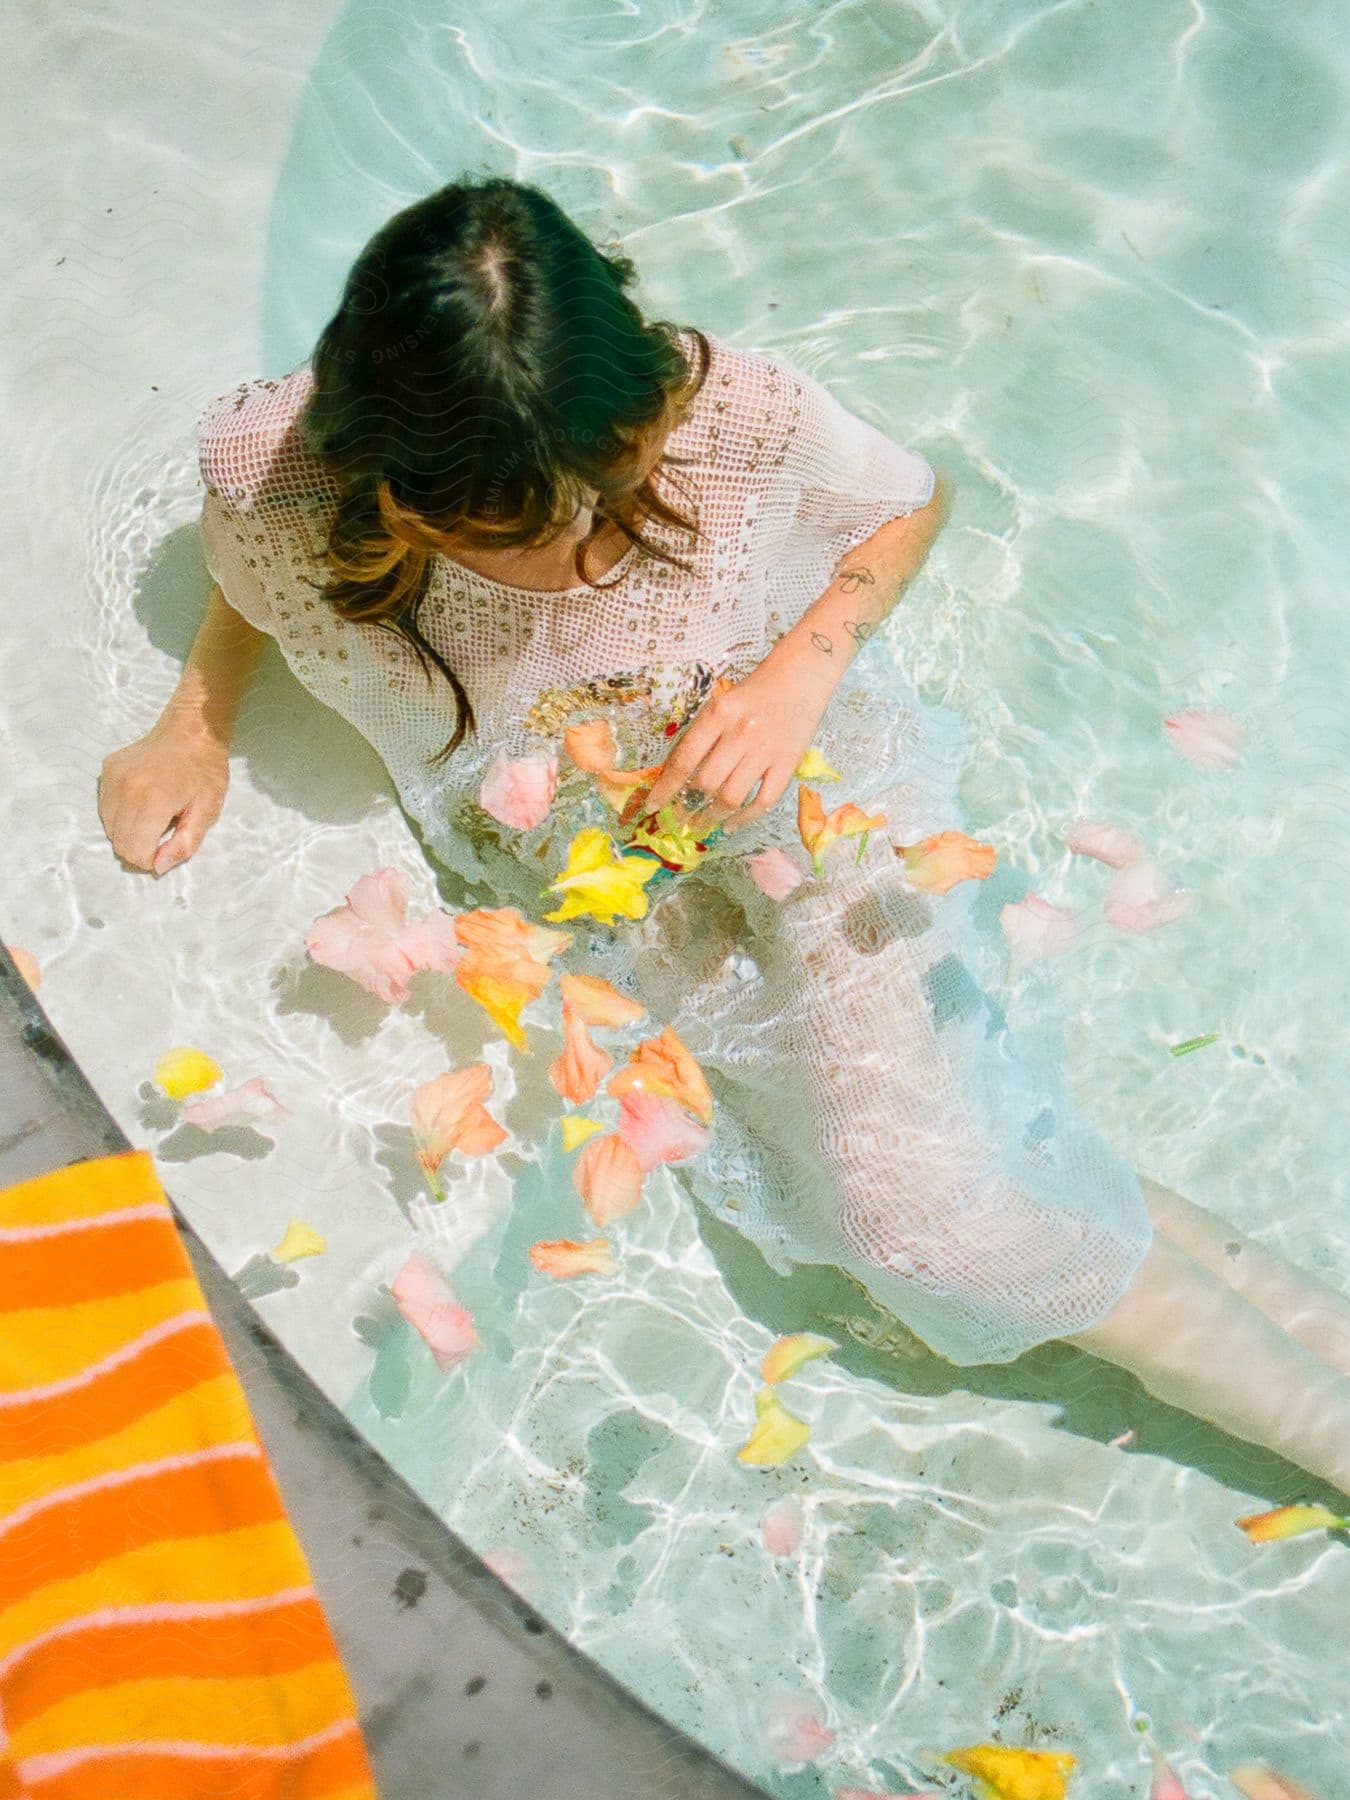 On a sunny day, a woman sits on the poolside surrounded by scattered flowers.